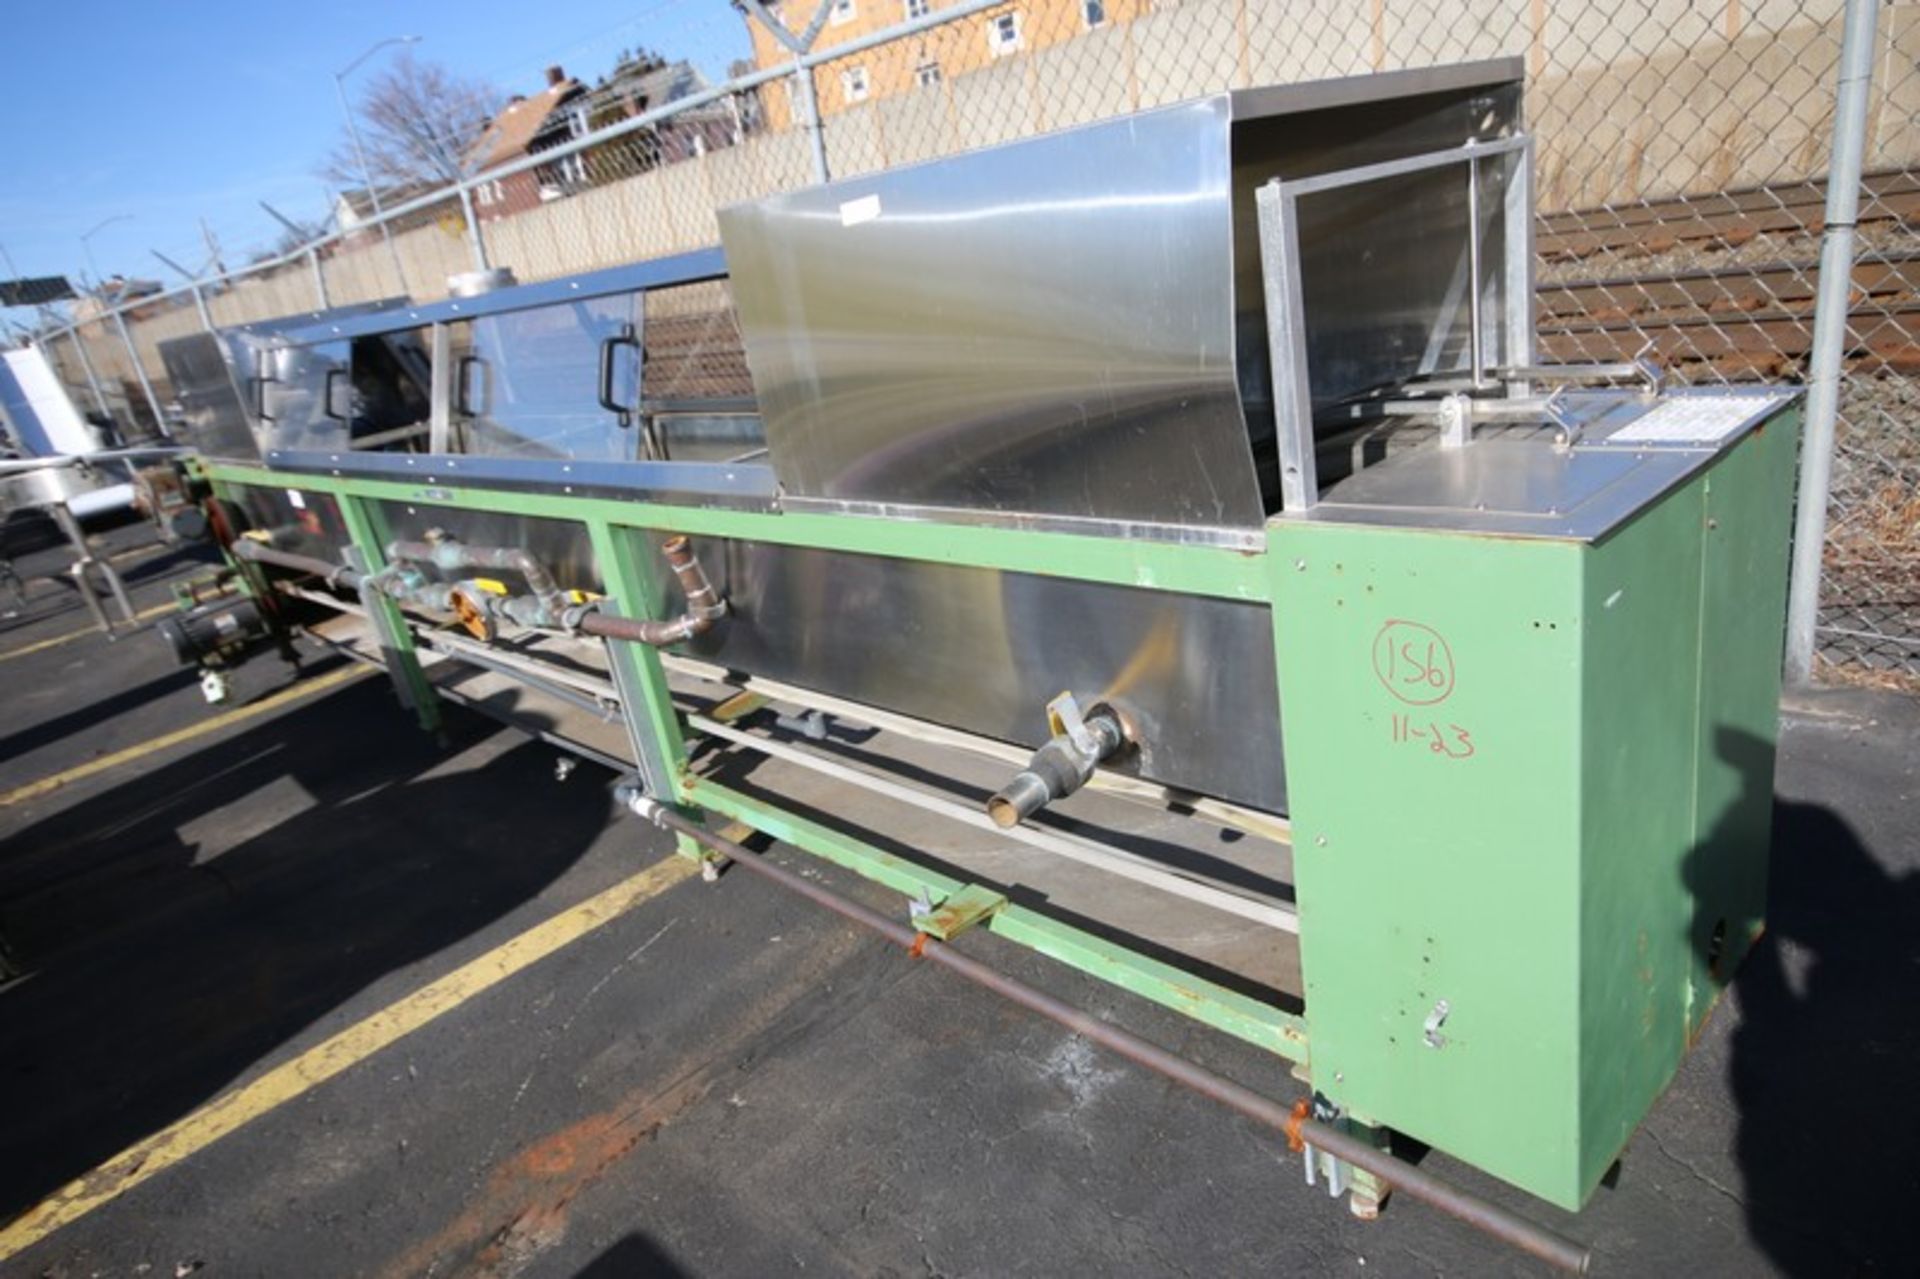 Terco Inc. 17' L x 24" W x 52" H Enclosed S/S Conveyor Bath with 7.5" W S/S Chain with 1hp / 1725 - Image 4 of 5